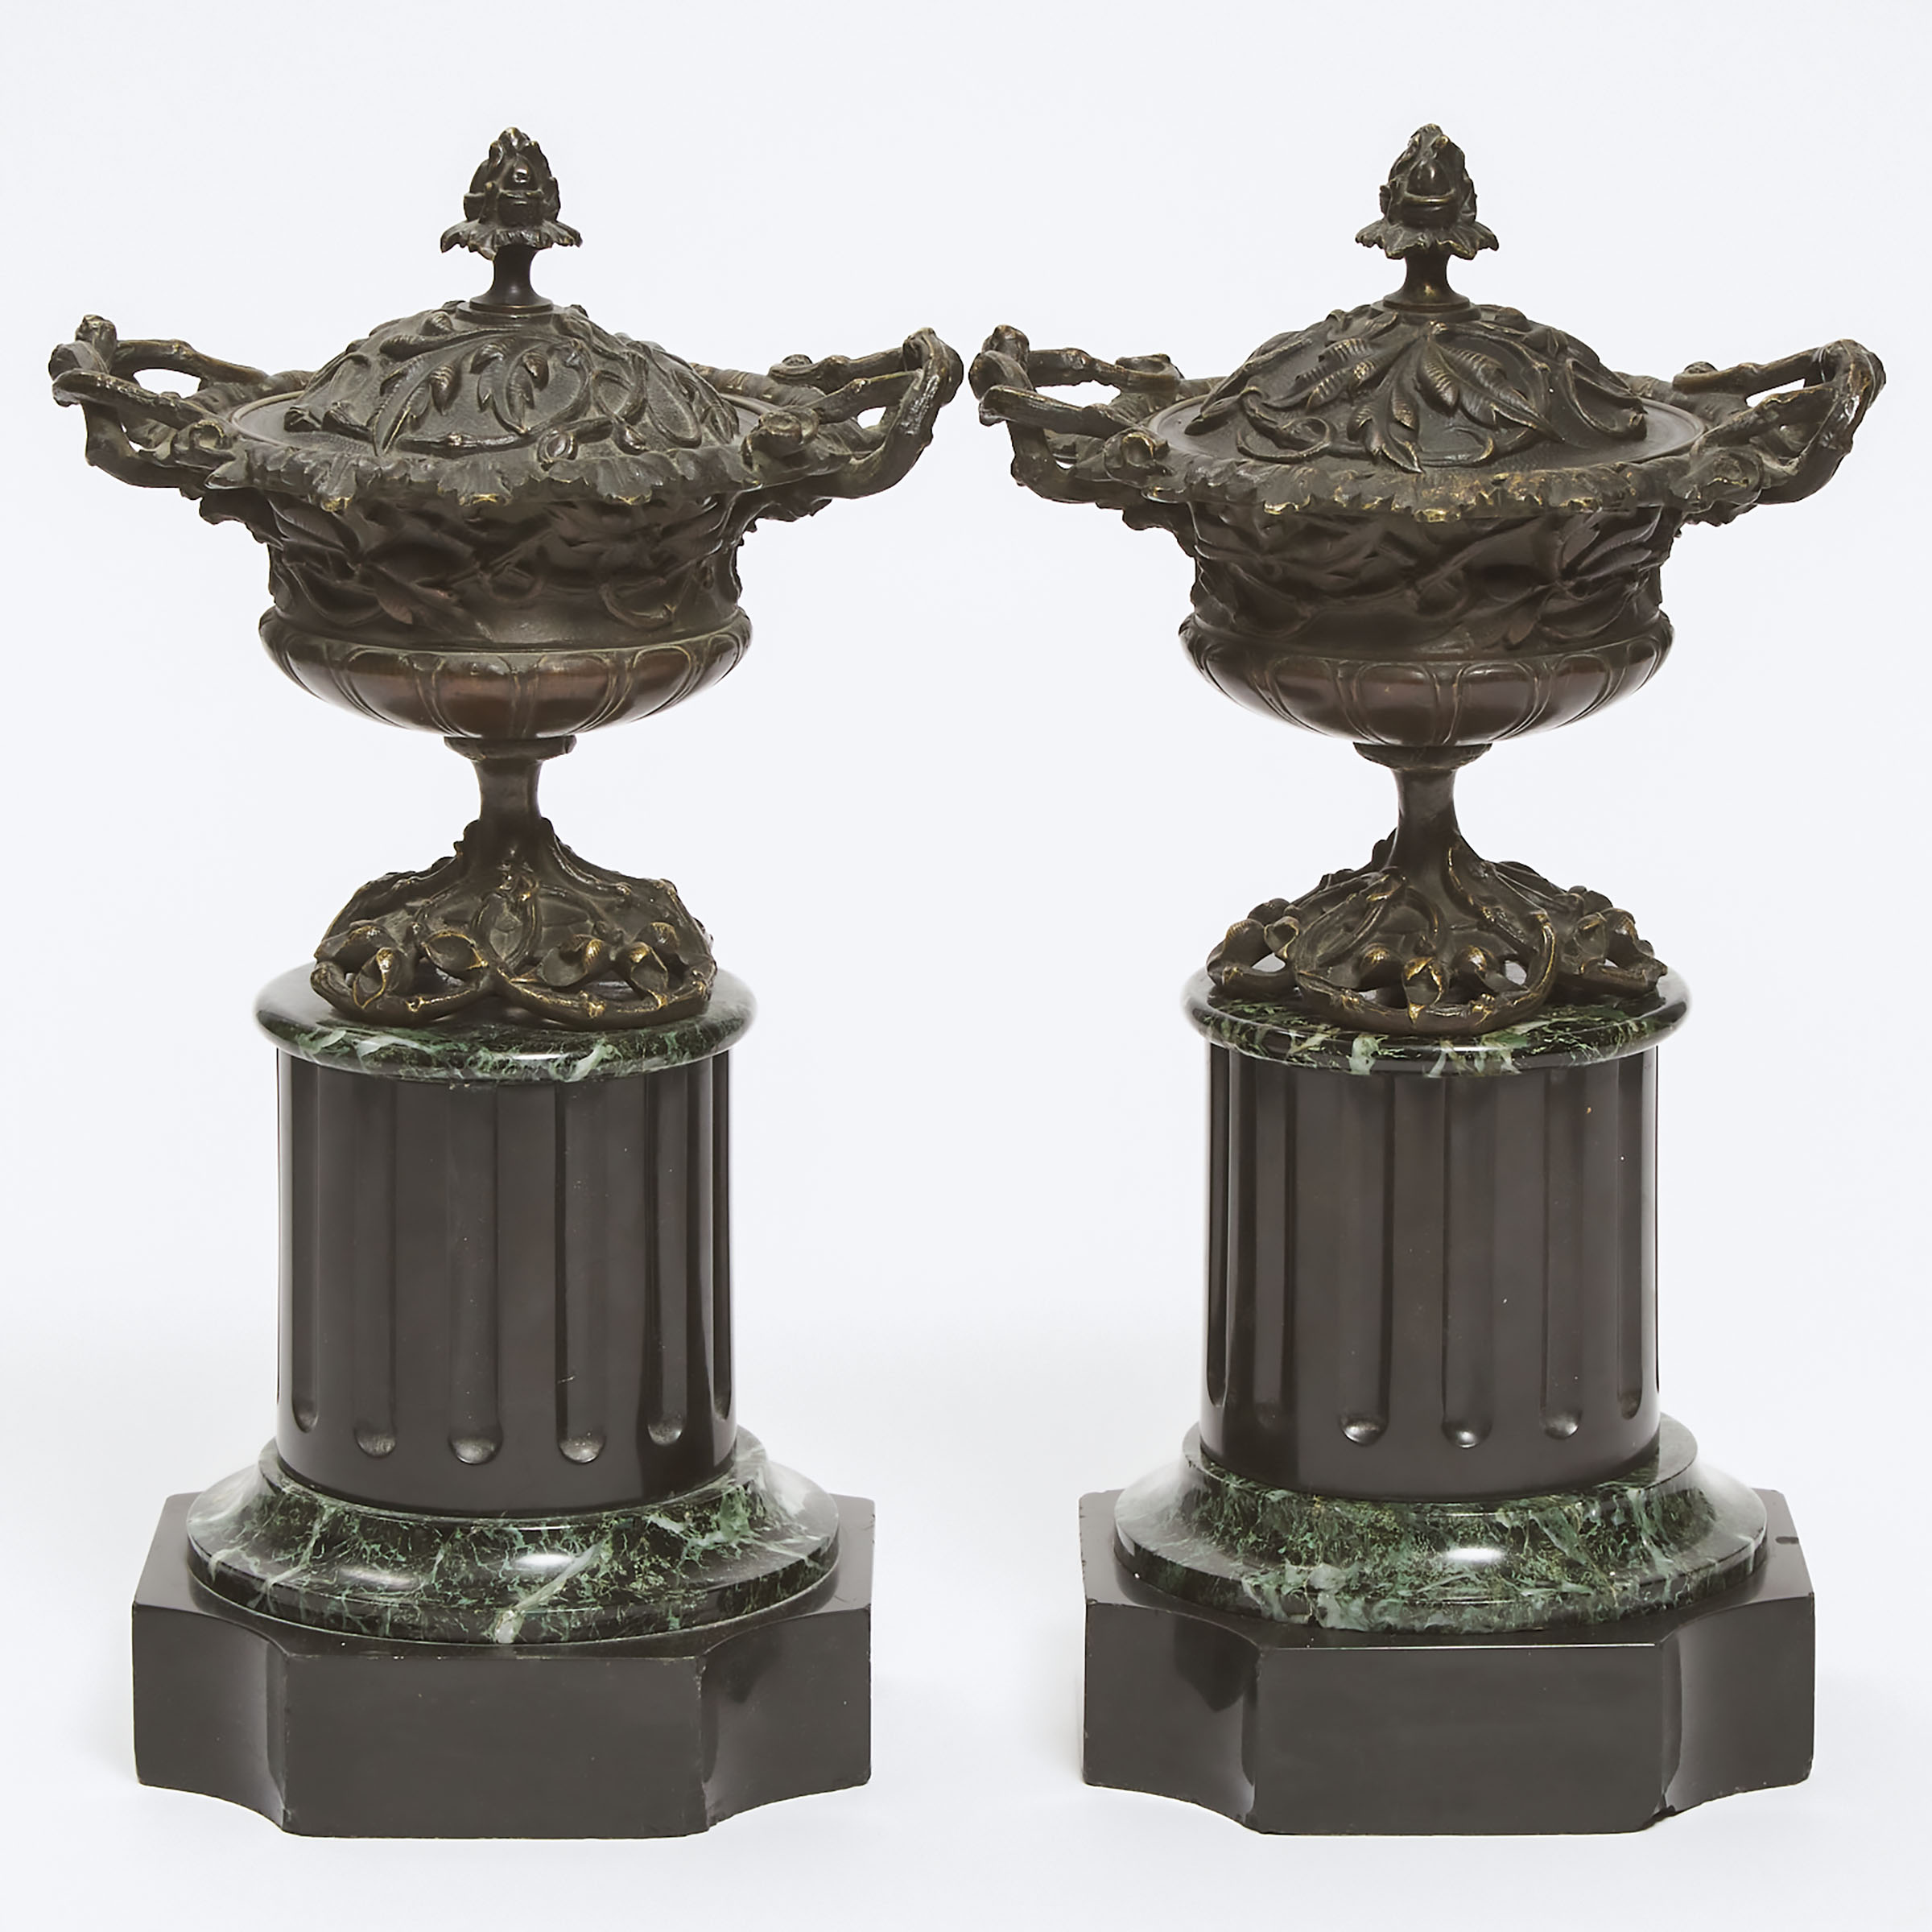 Pair of French Bronze Naturalistic Covered Mantle Urns, c.1900